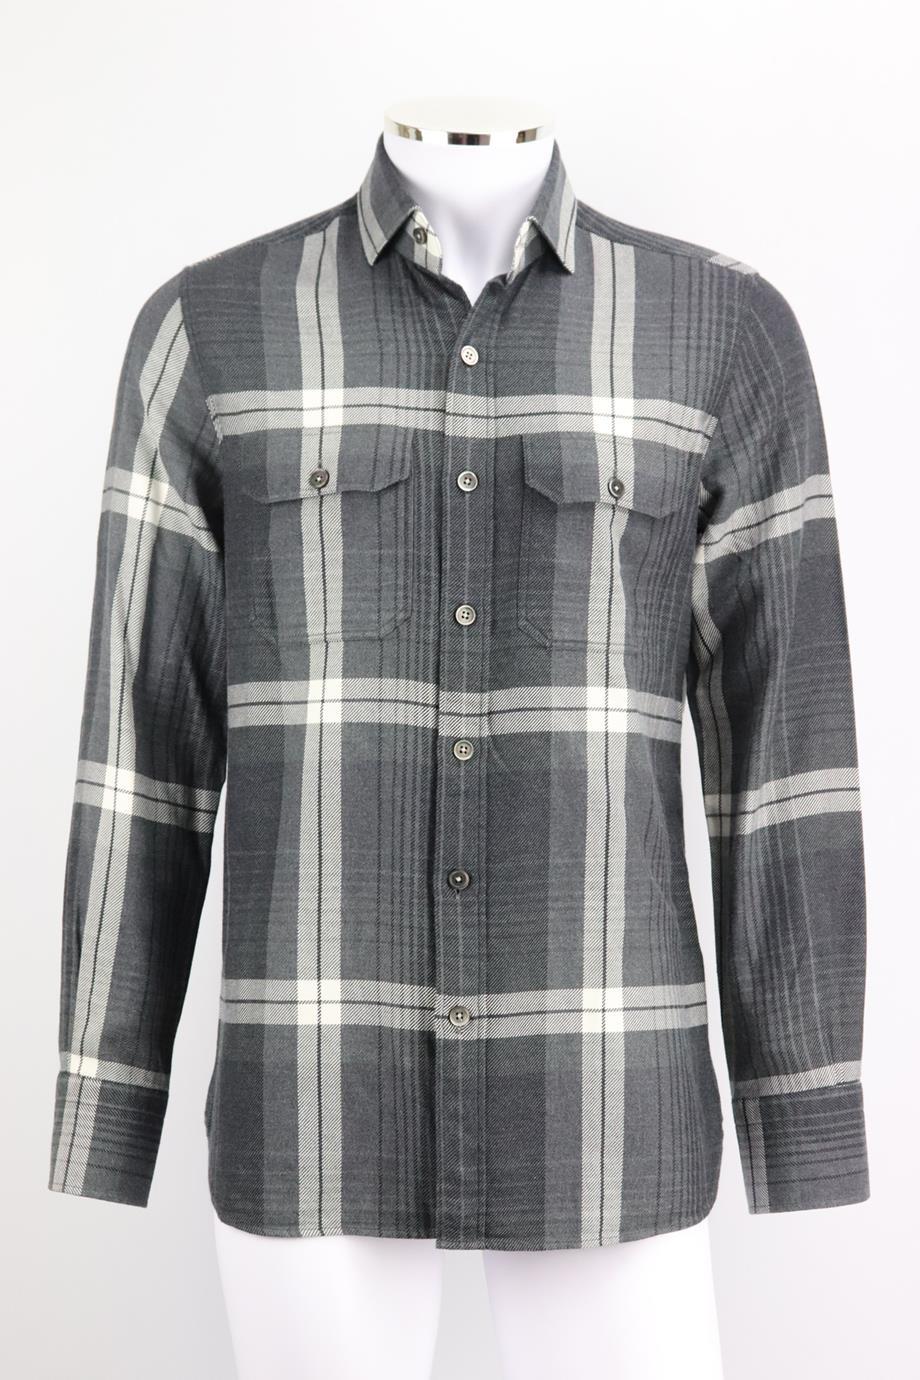 Tom Ford men’s checked cotton flannel shirt. Black, grey and white. Long sleeve, v-neck. Button fastening at front. 100% Cotton. Size: UK/US Chest 40 (Large, IT 50, UK/US Collar 16). Shoulder to shoulder: 17 in. Chest: 41 in. Waist: 37 in. Hips: 37